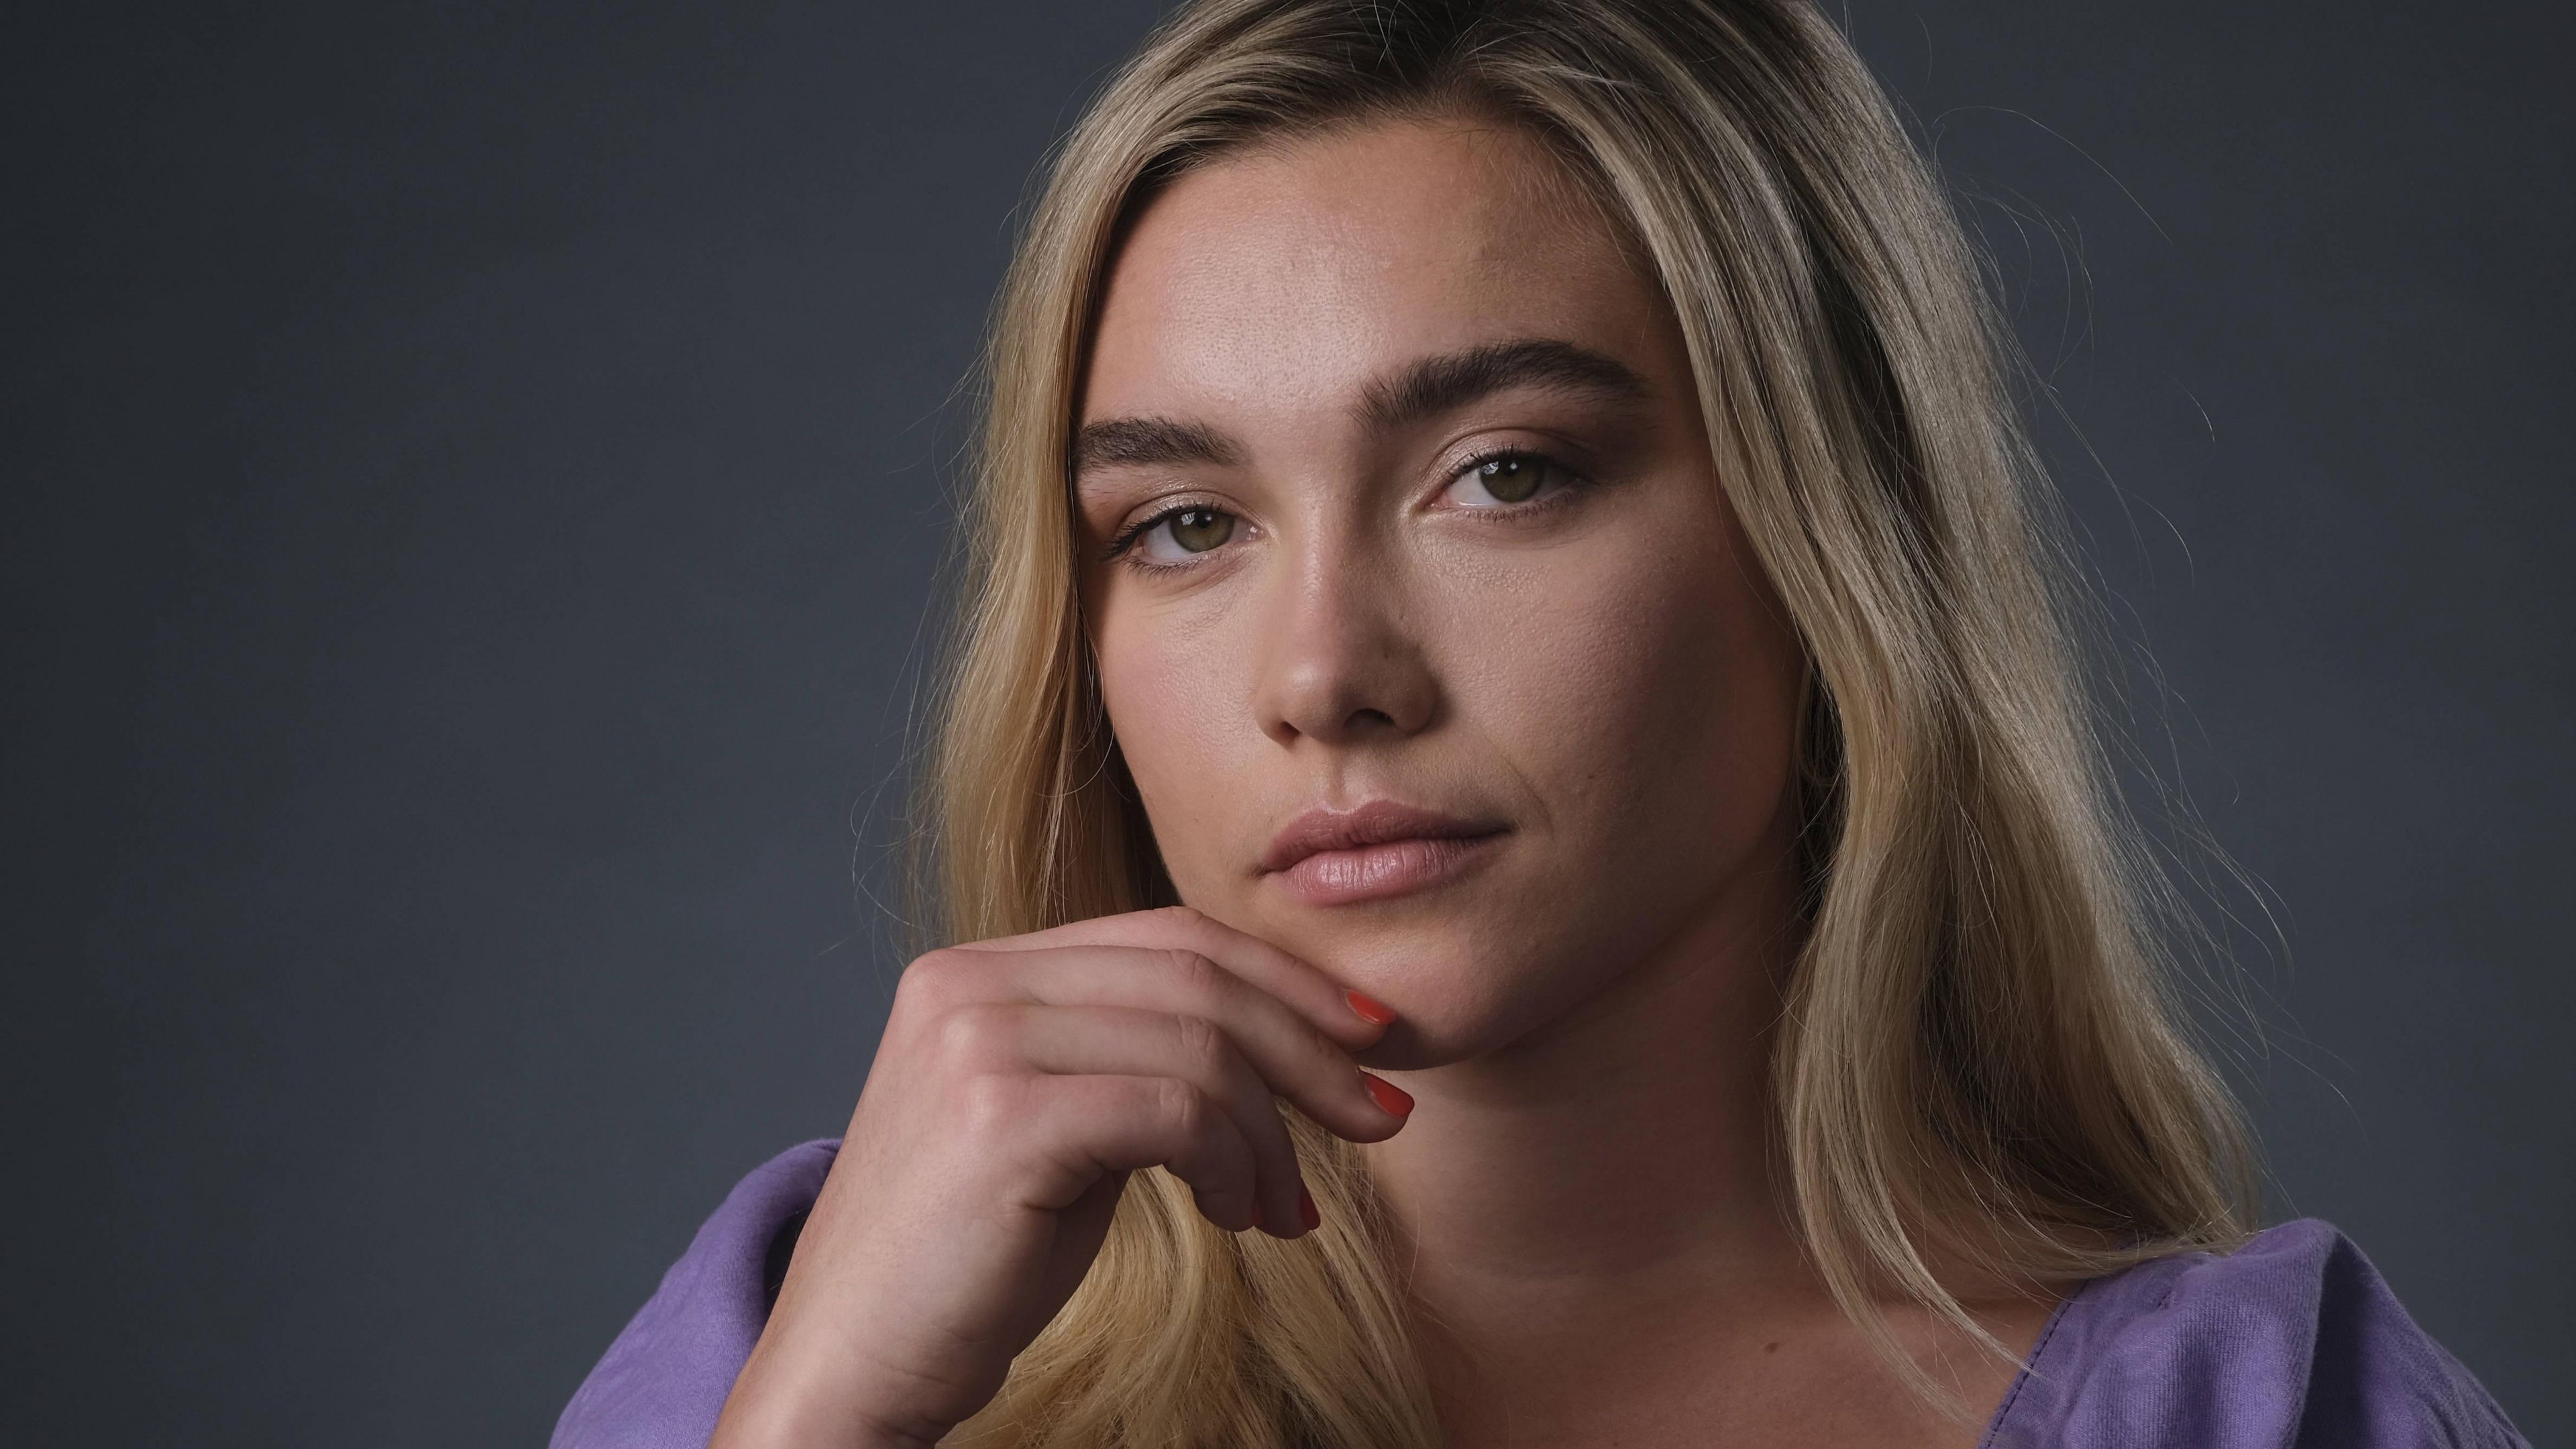 A woman with her hand under her chin - Florence Pugh